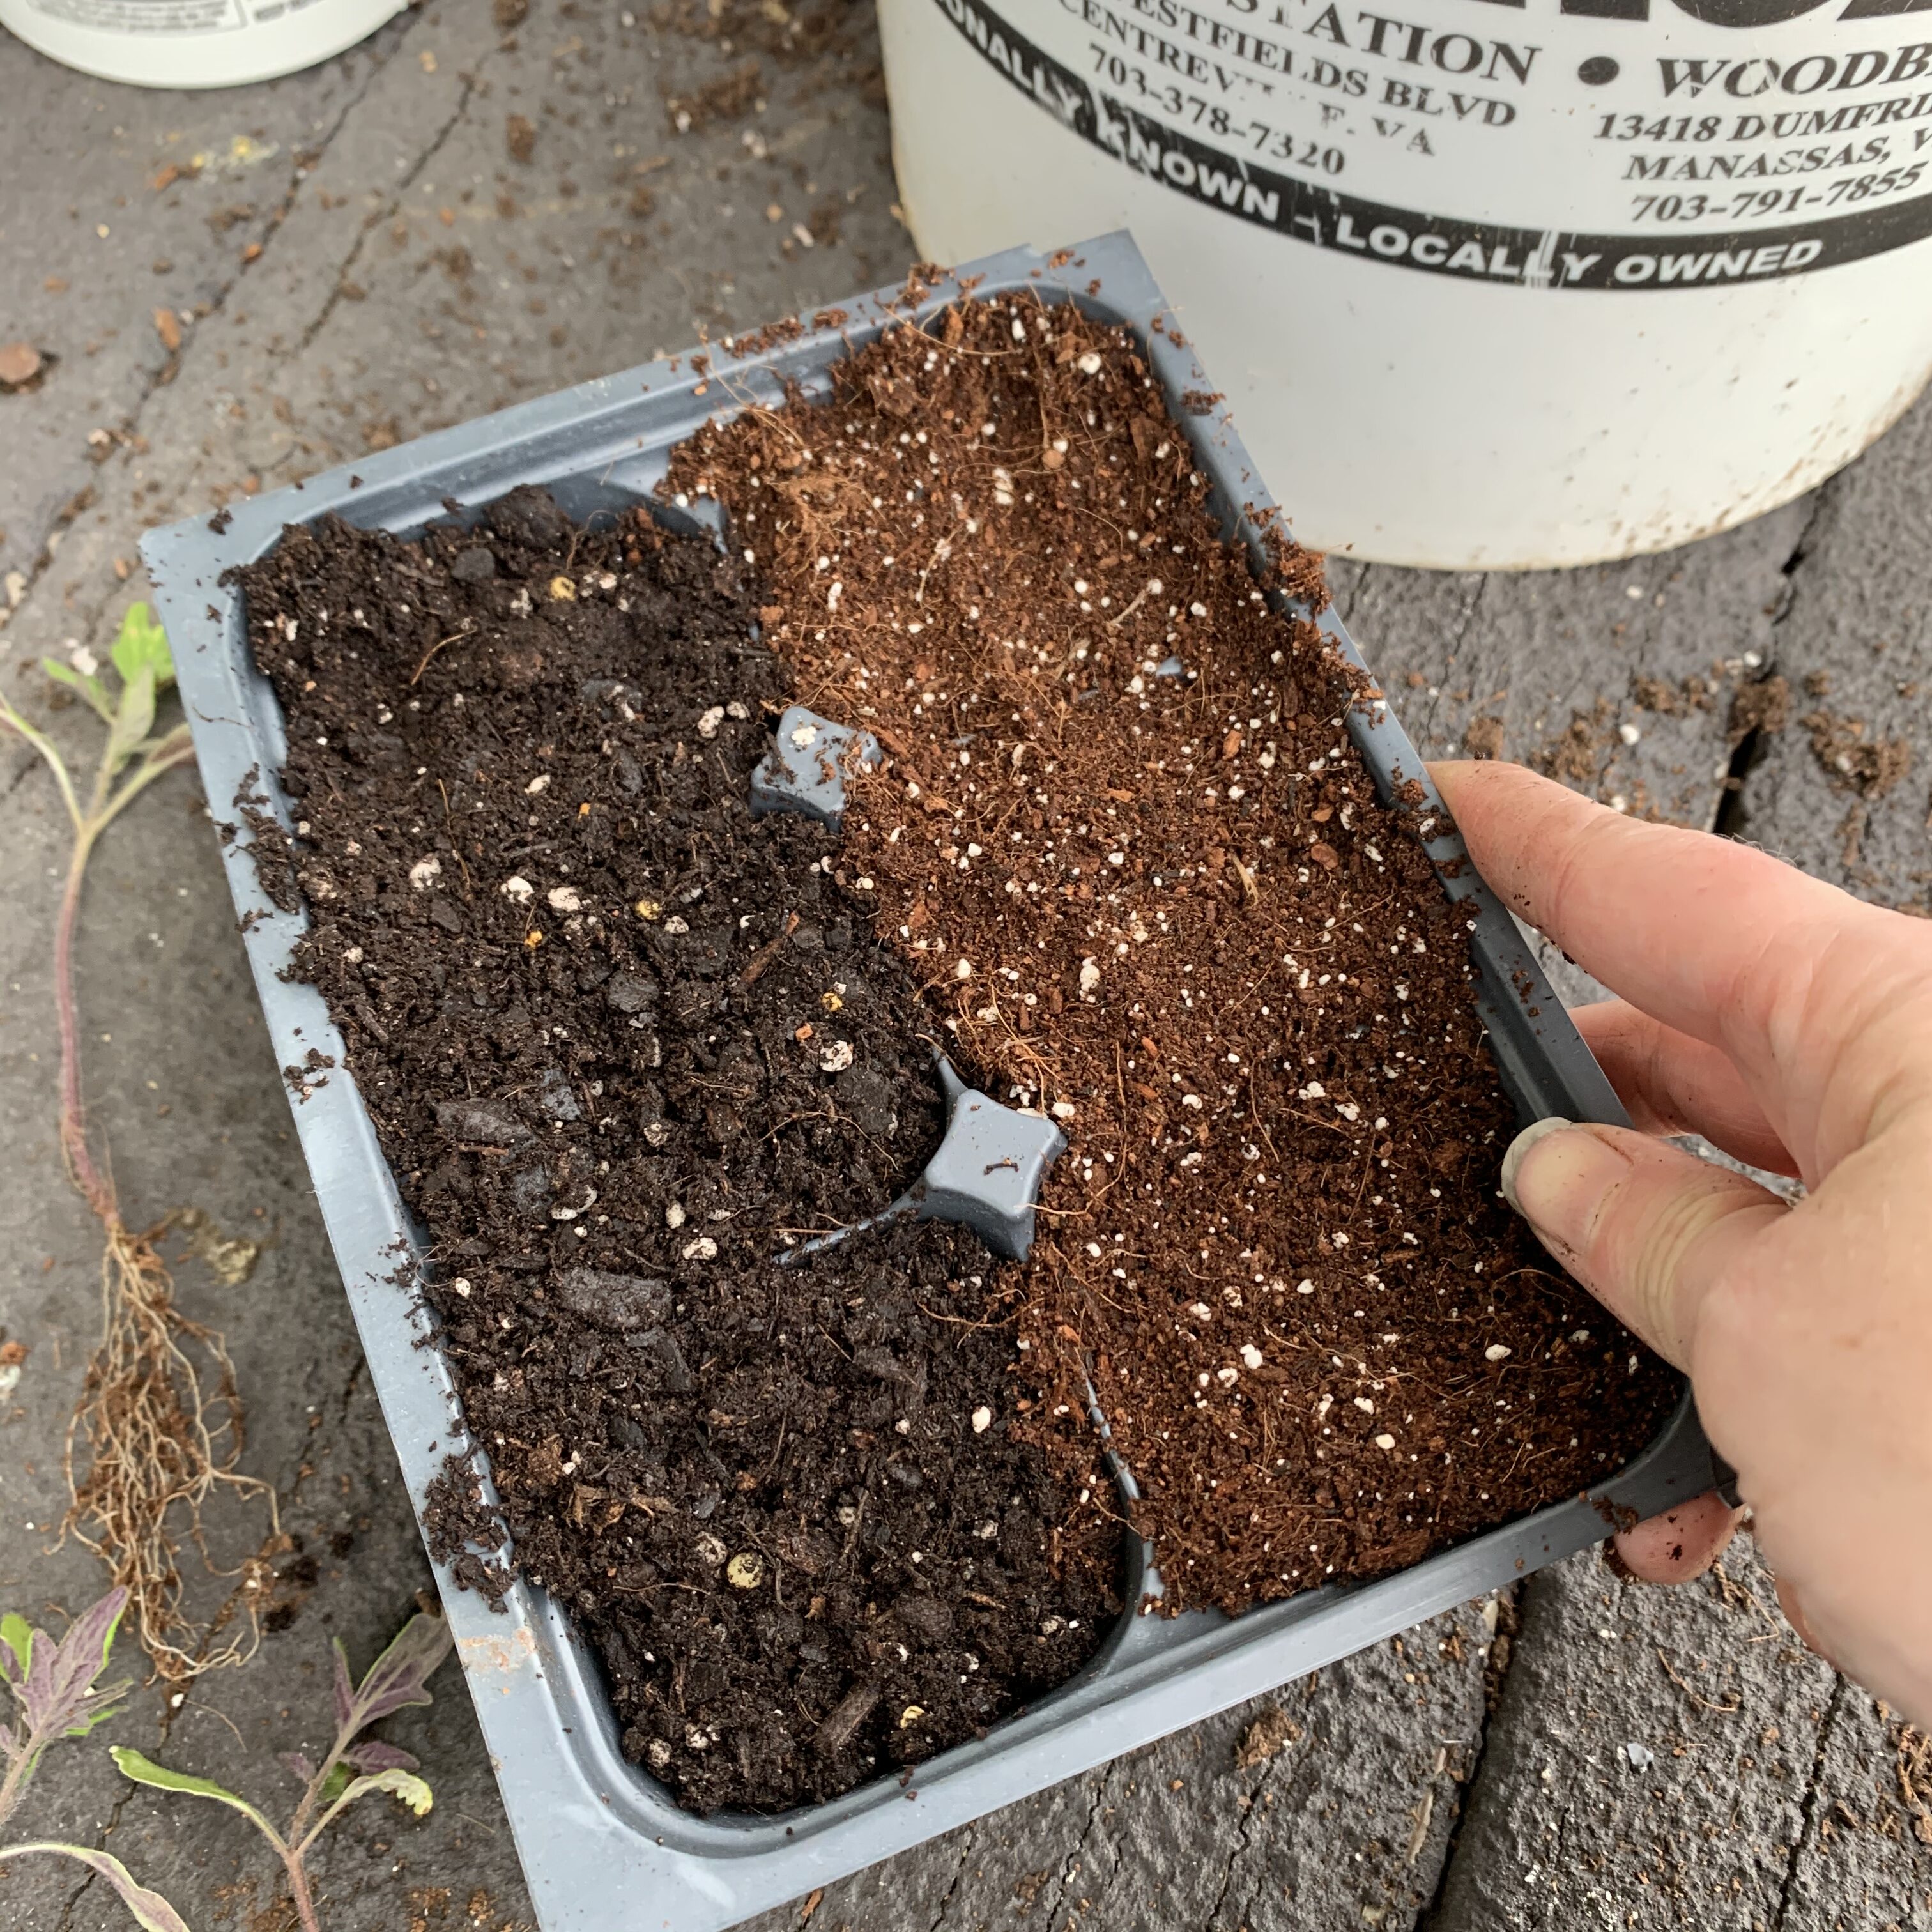 275508C4 A418 4D93 8B7D FB6BD63F6AF3 Comparing Burpee Organic Seed Starting Mix vs Miracle Gro Moisture Control Potting Mix for transplanted tomato seedlings - Results